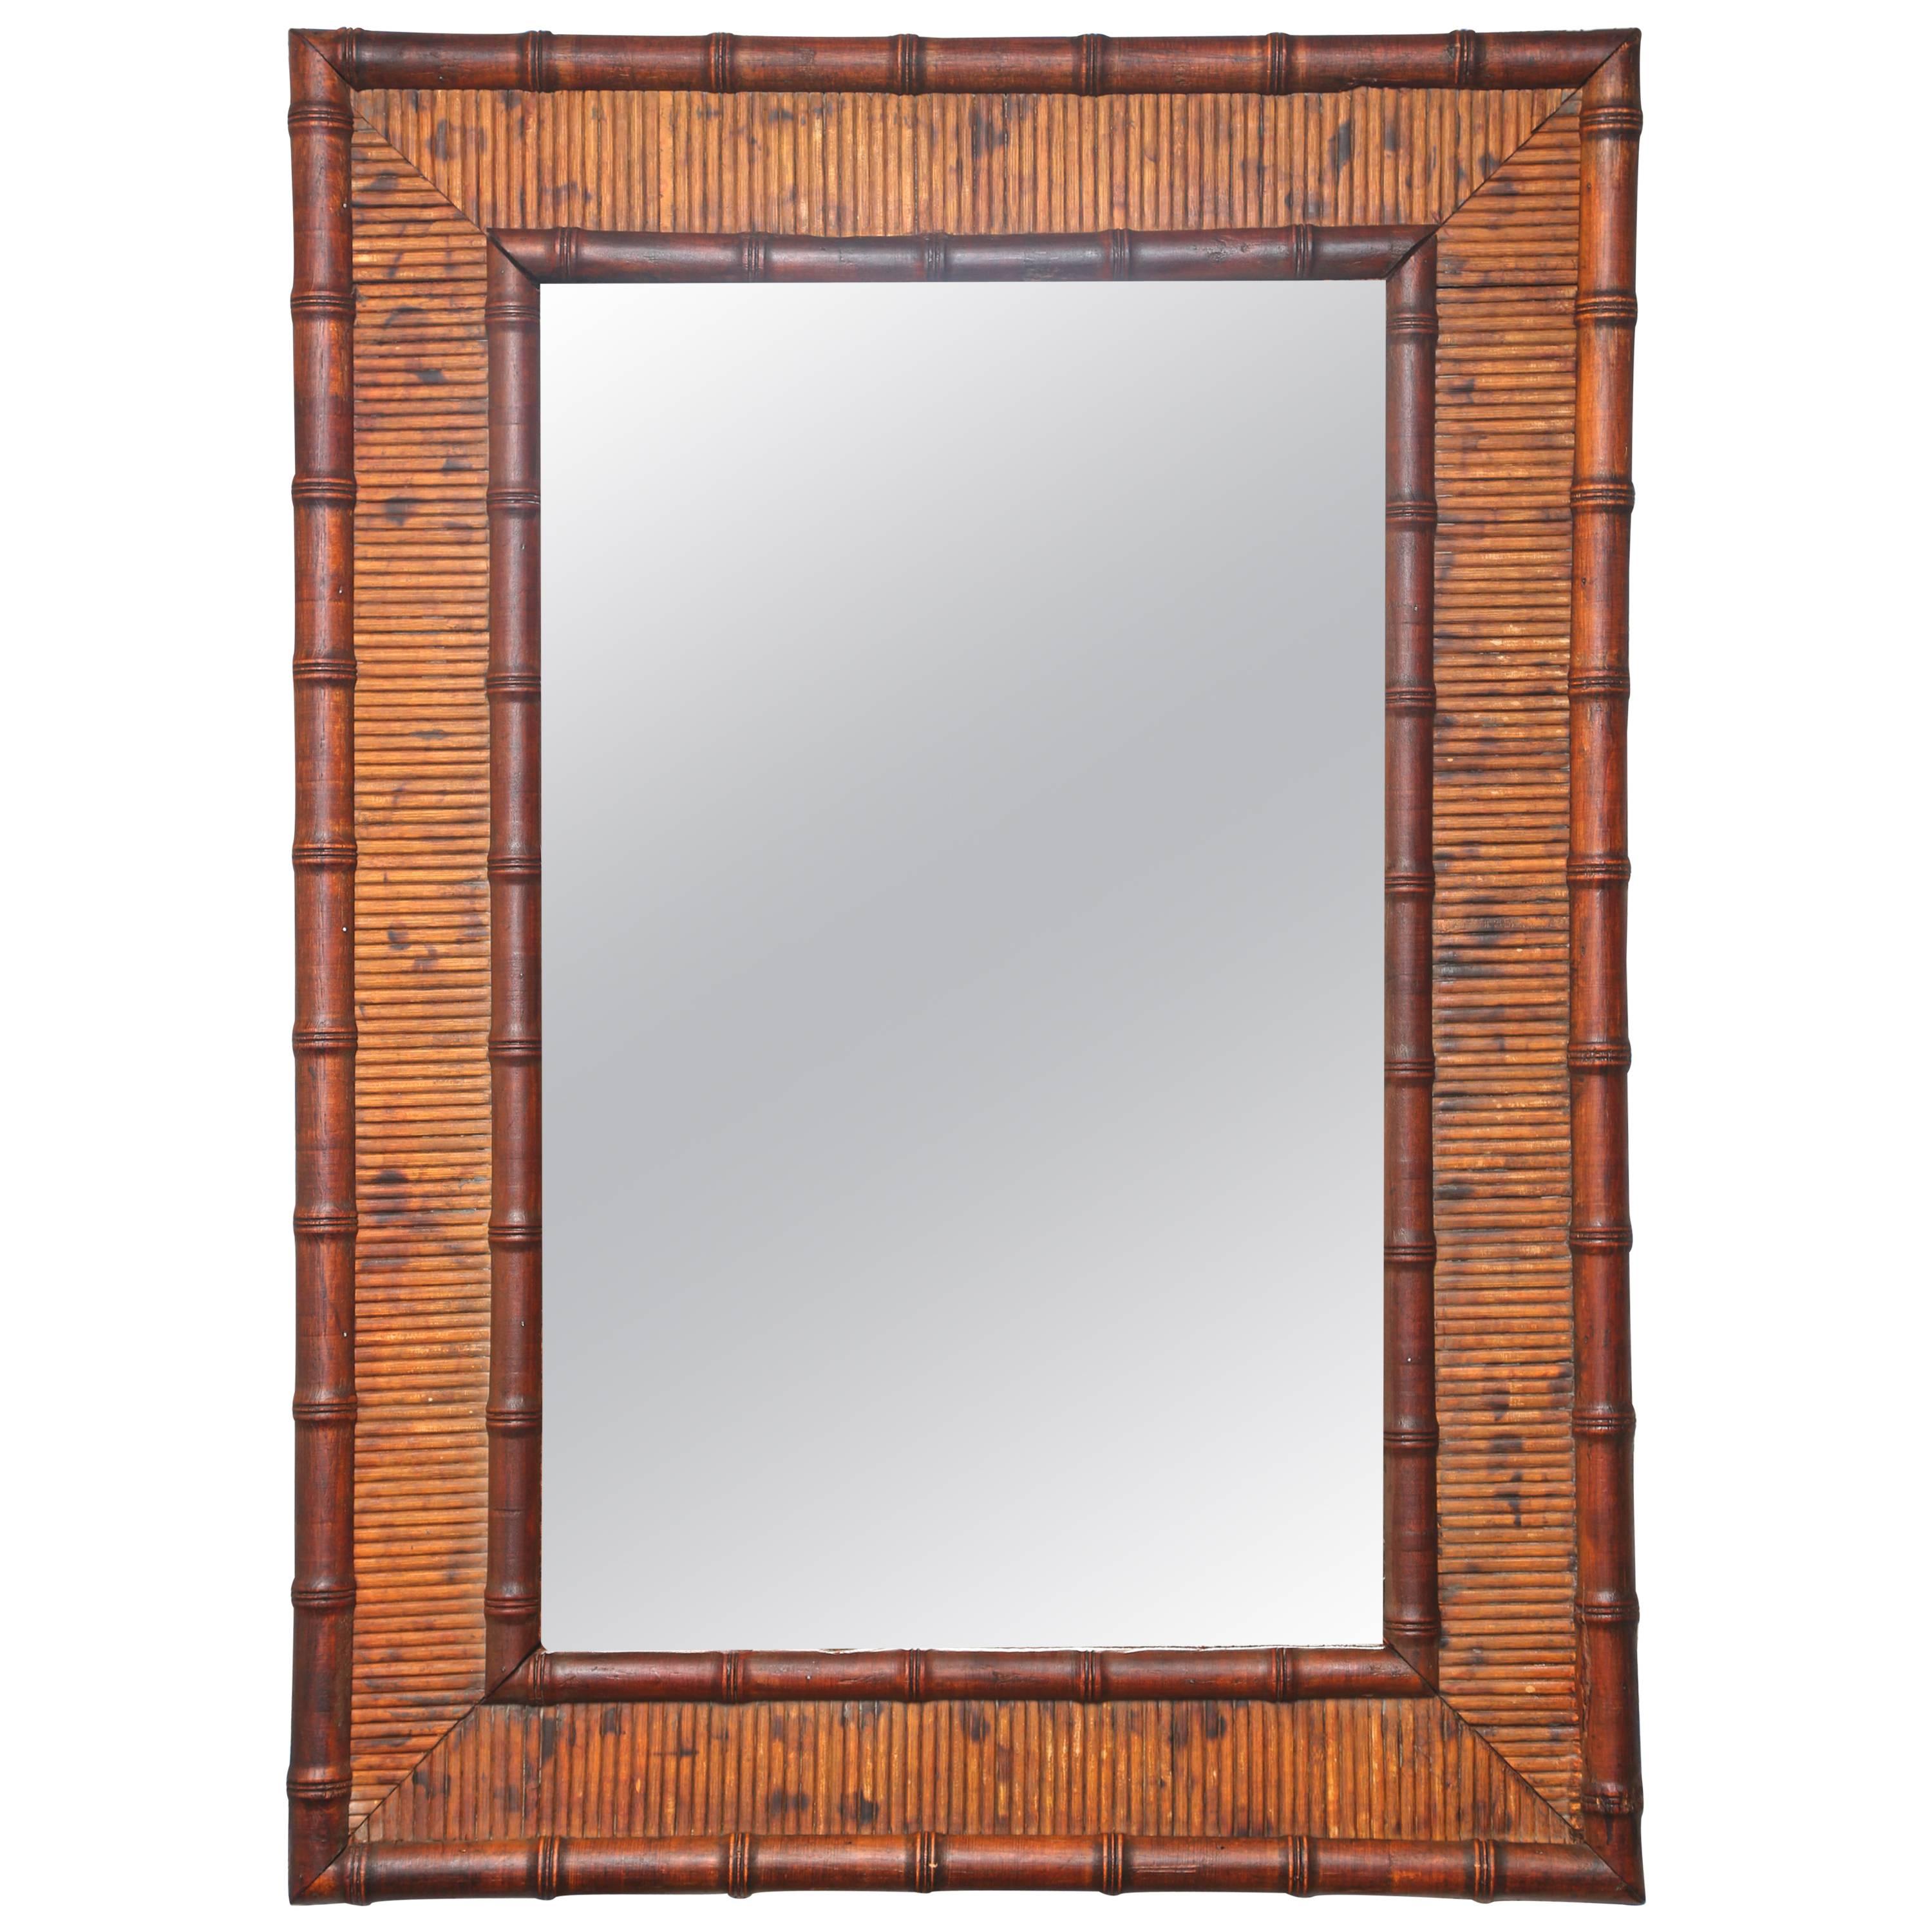 Very Sweet French Vintage Bamboo Mirror